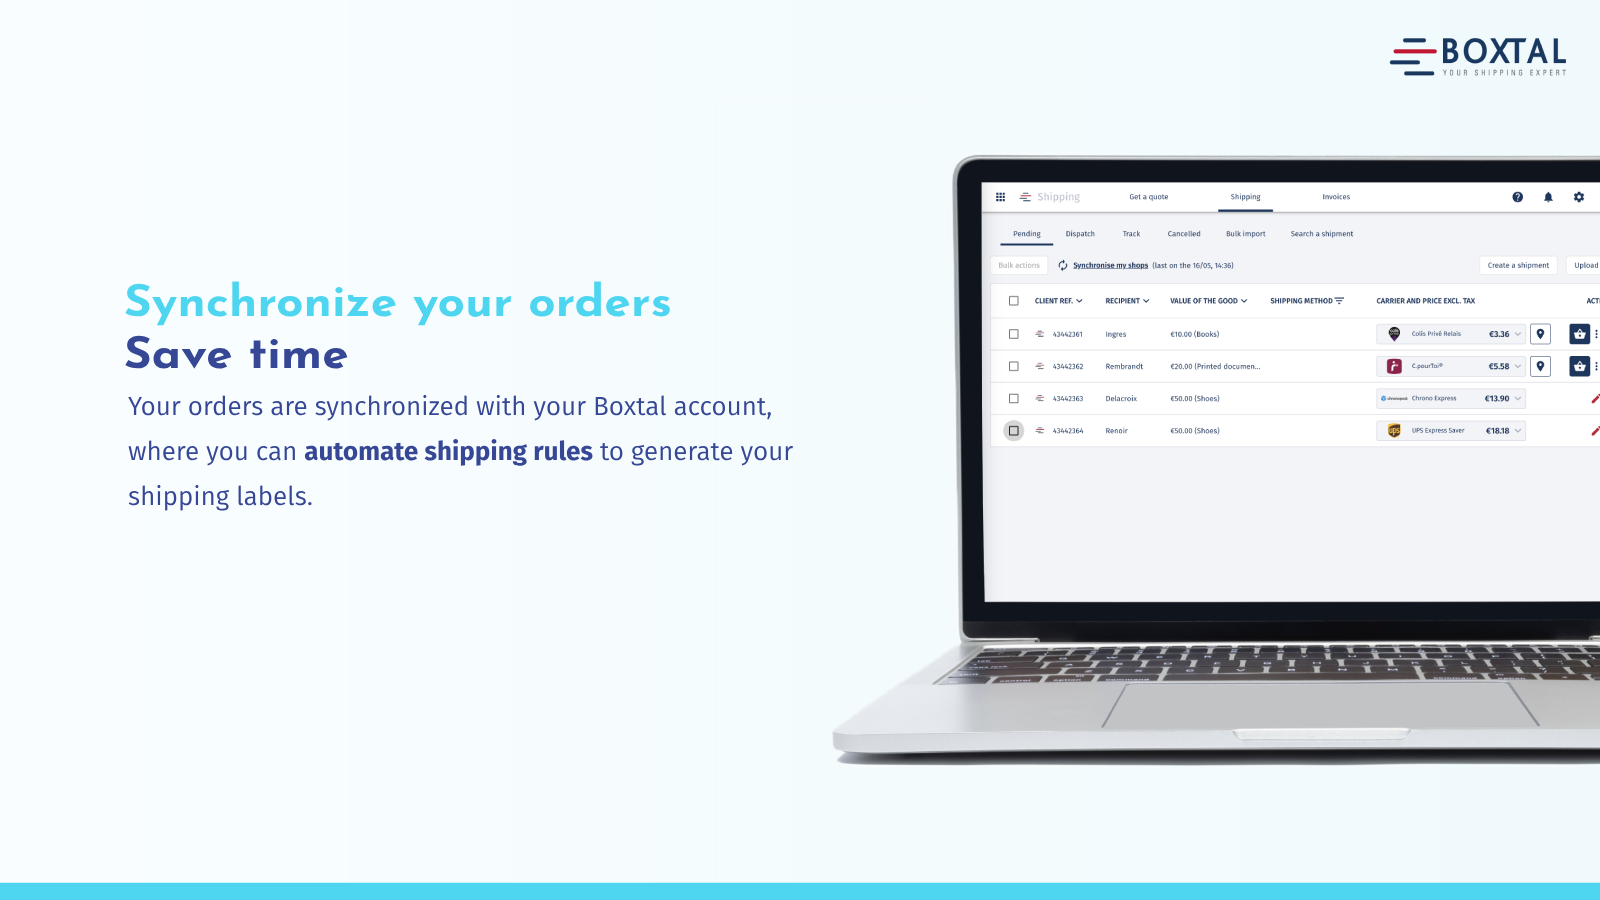 Synchronize your orders. Save time.